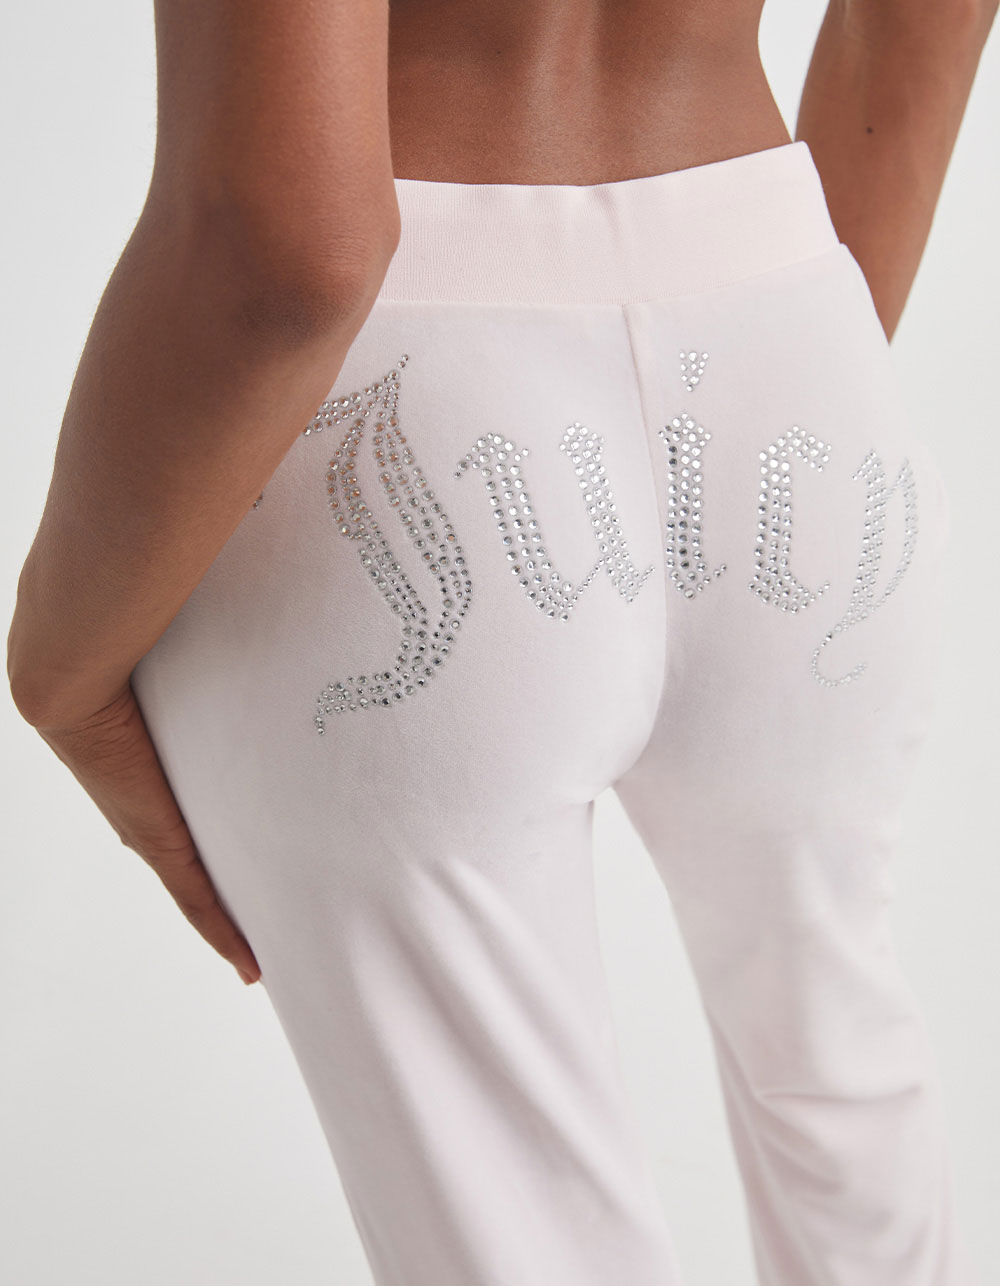 JUICY COUTURE OG Bling Womens Track Pants - LIGHT PINK